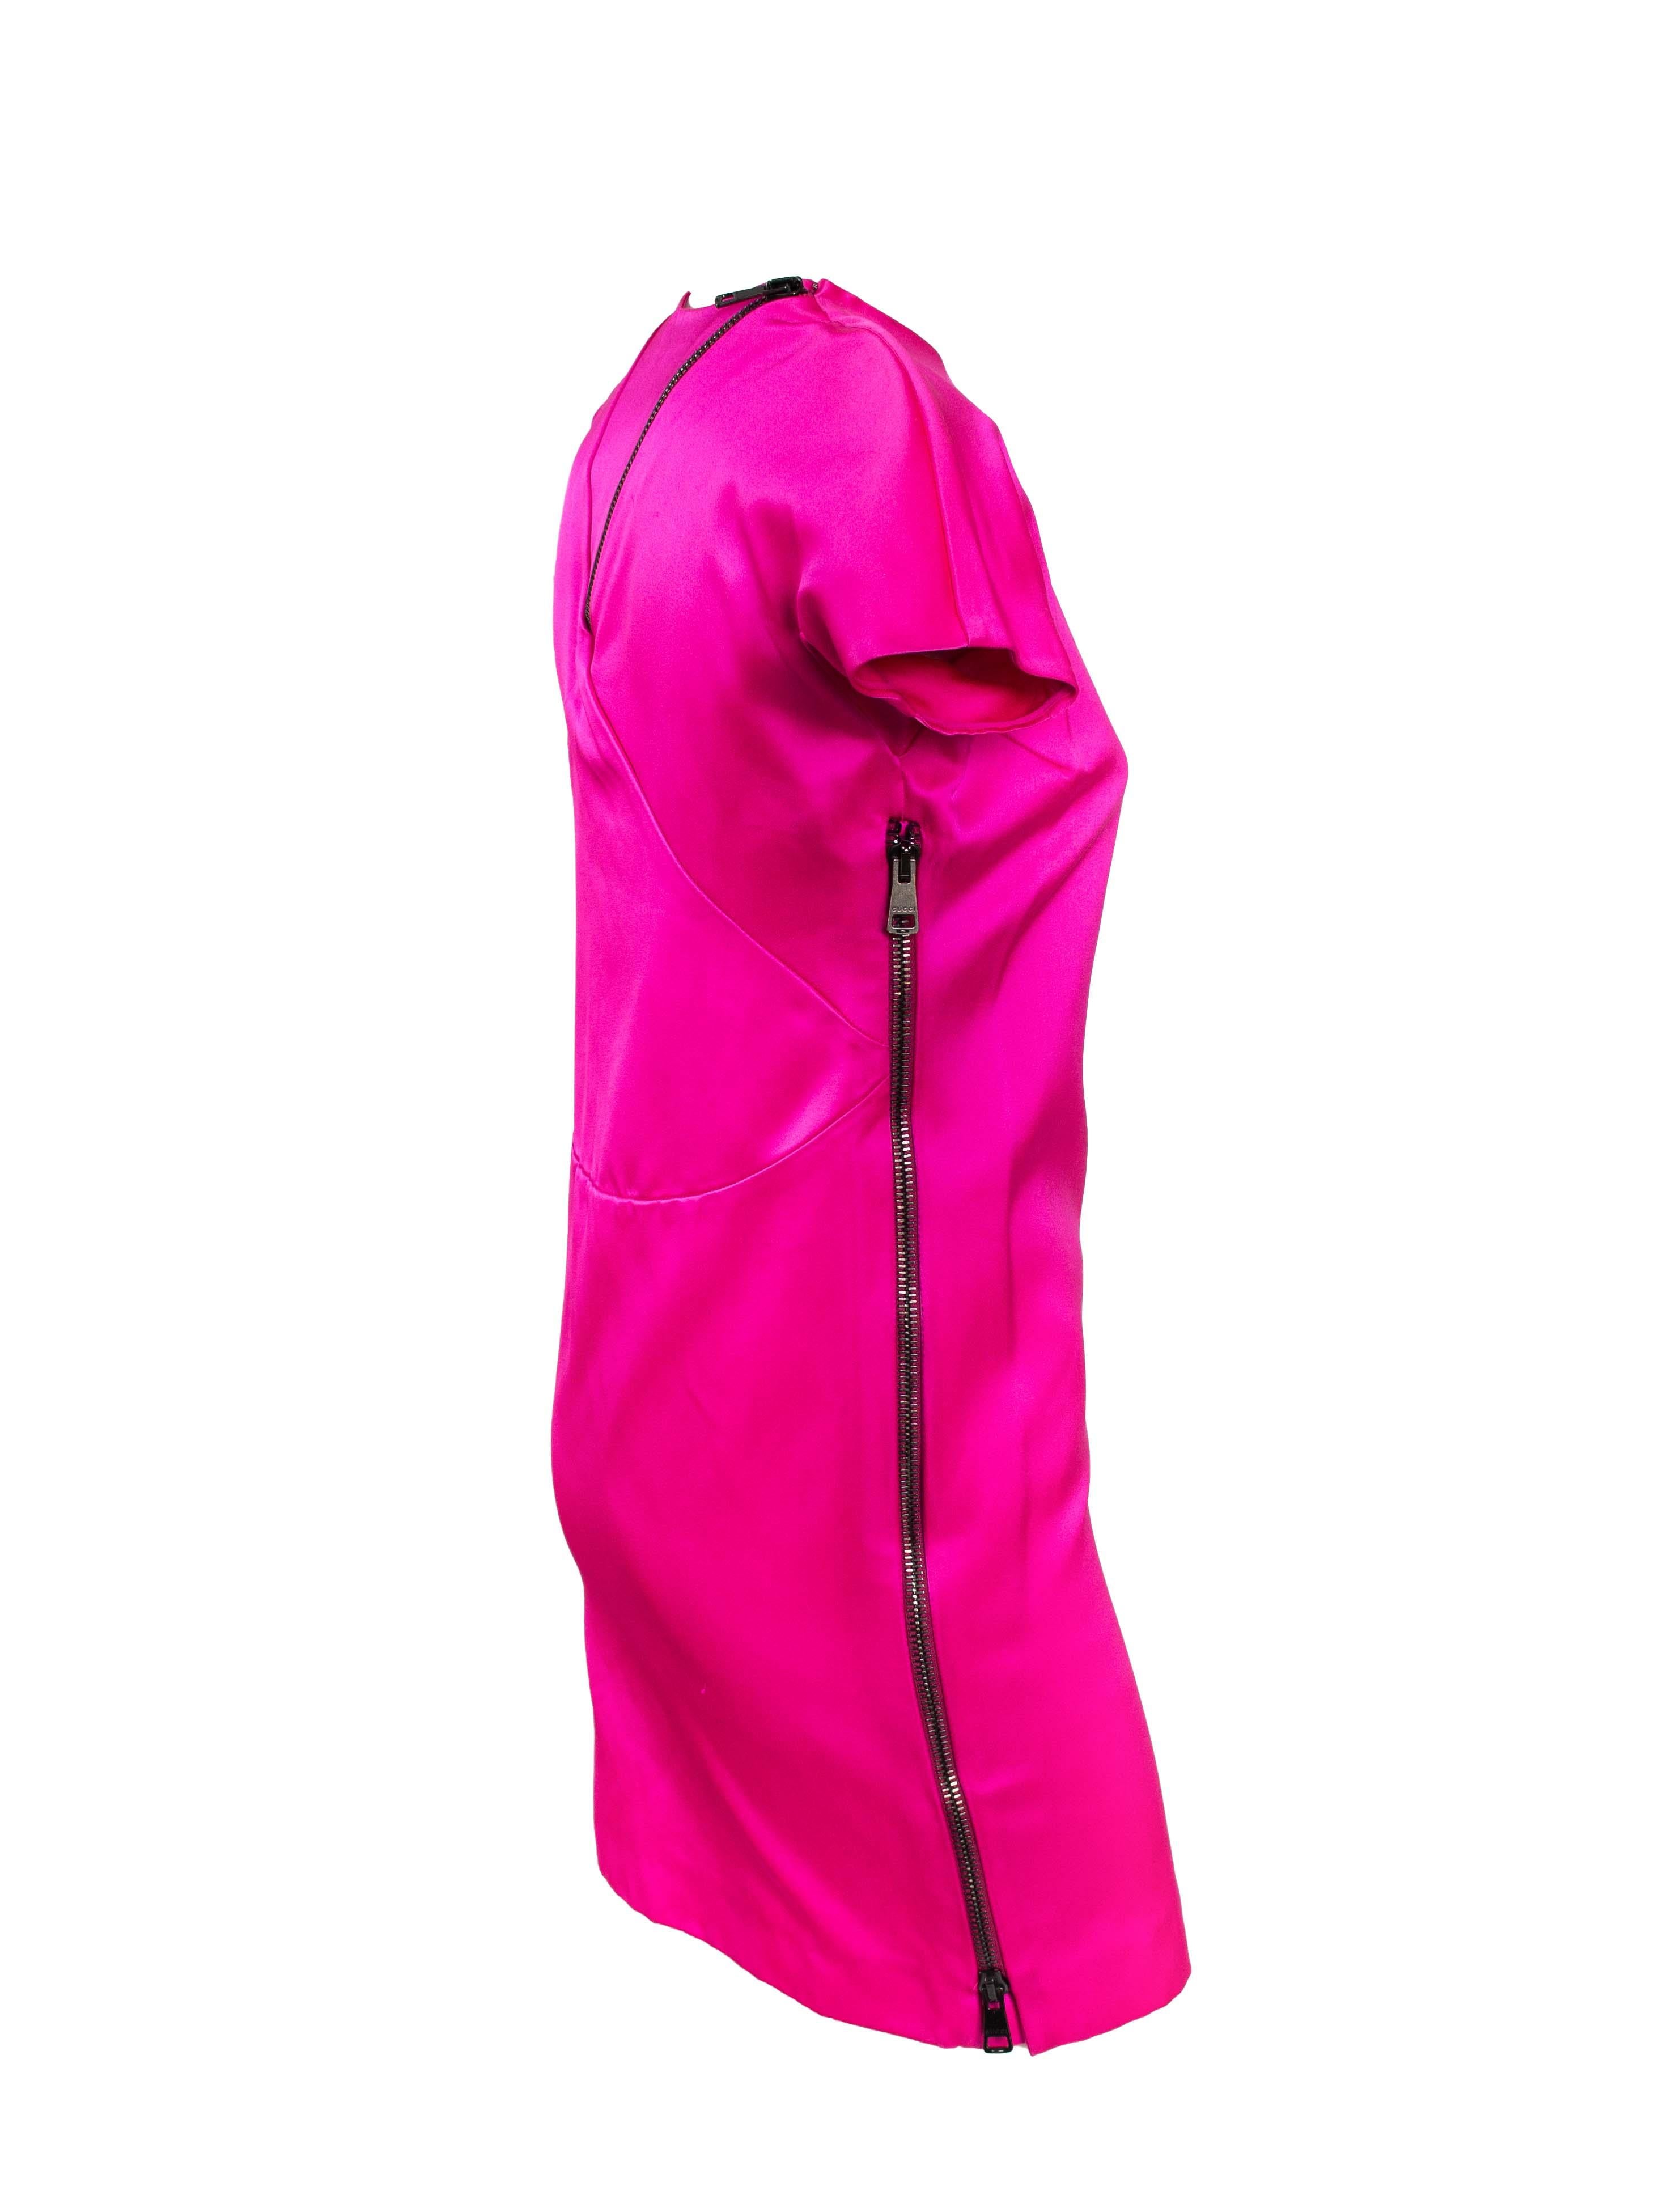 F/W 2001 Gucci by Tom Ford Hot Pink Silk Satin Zipper Mini Dress Runway In Good Condition For Sale In West Hollywood, CA